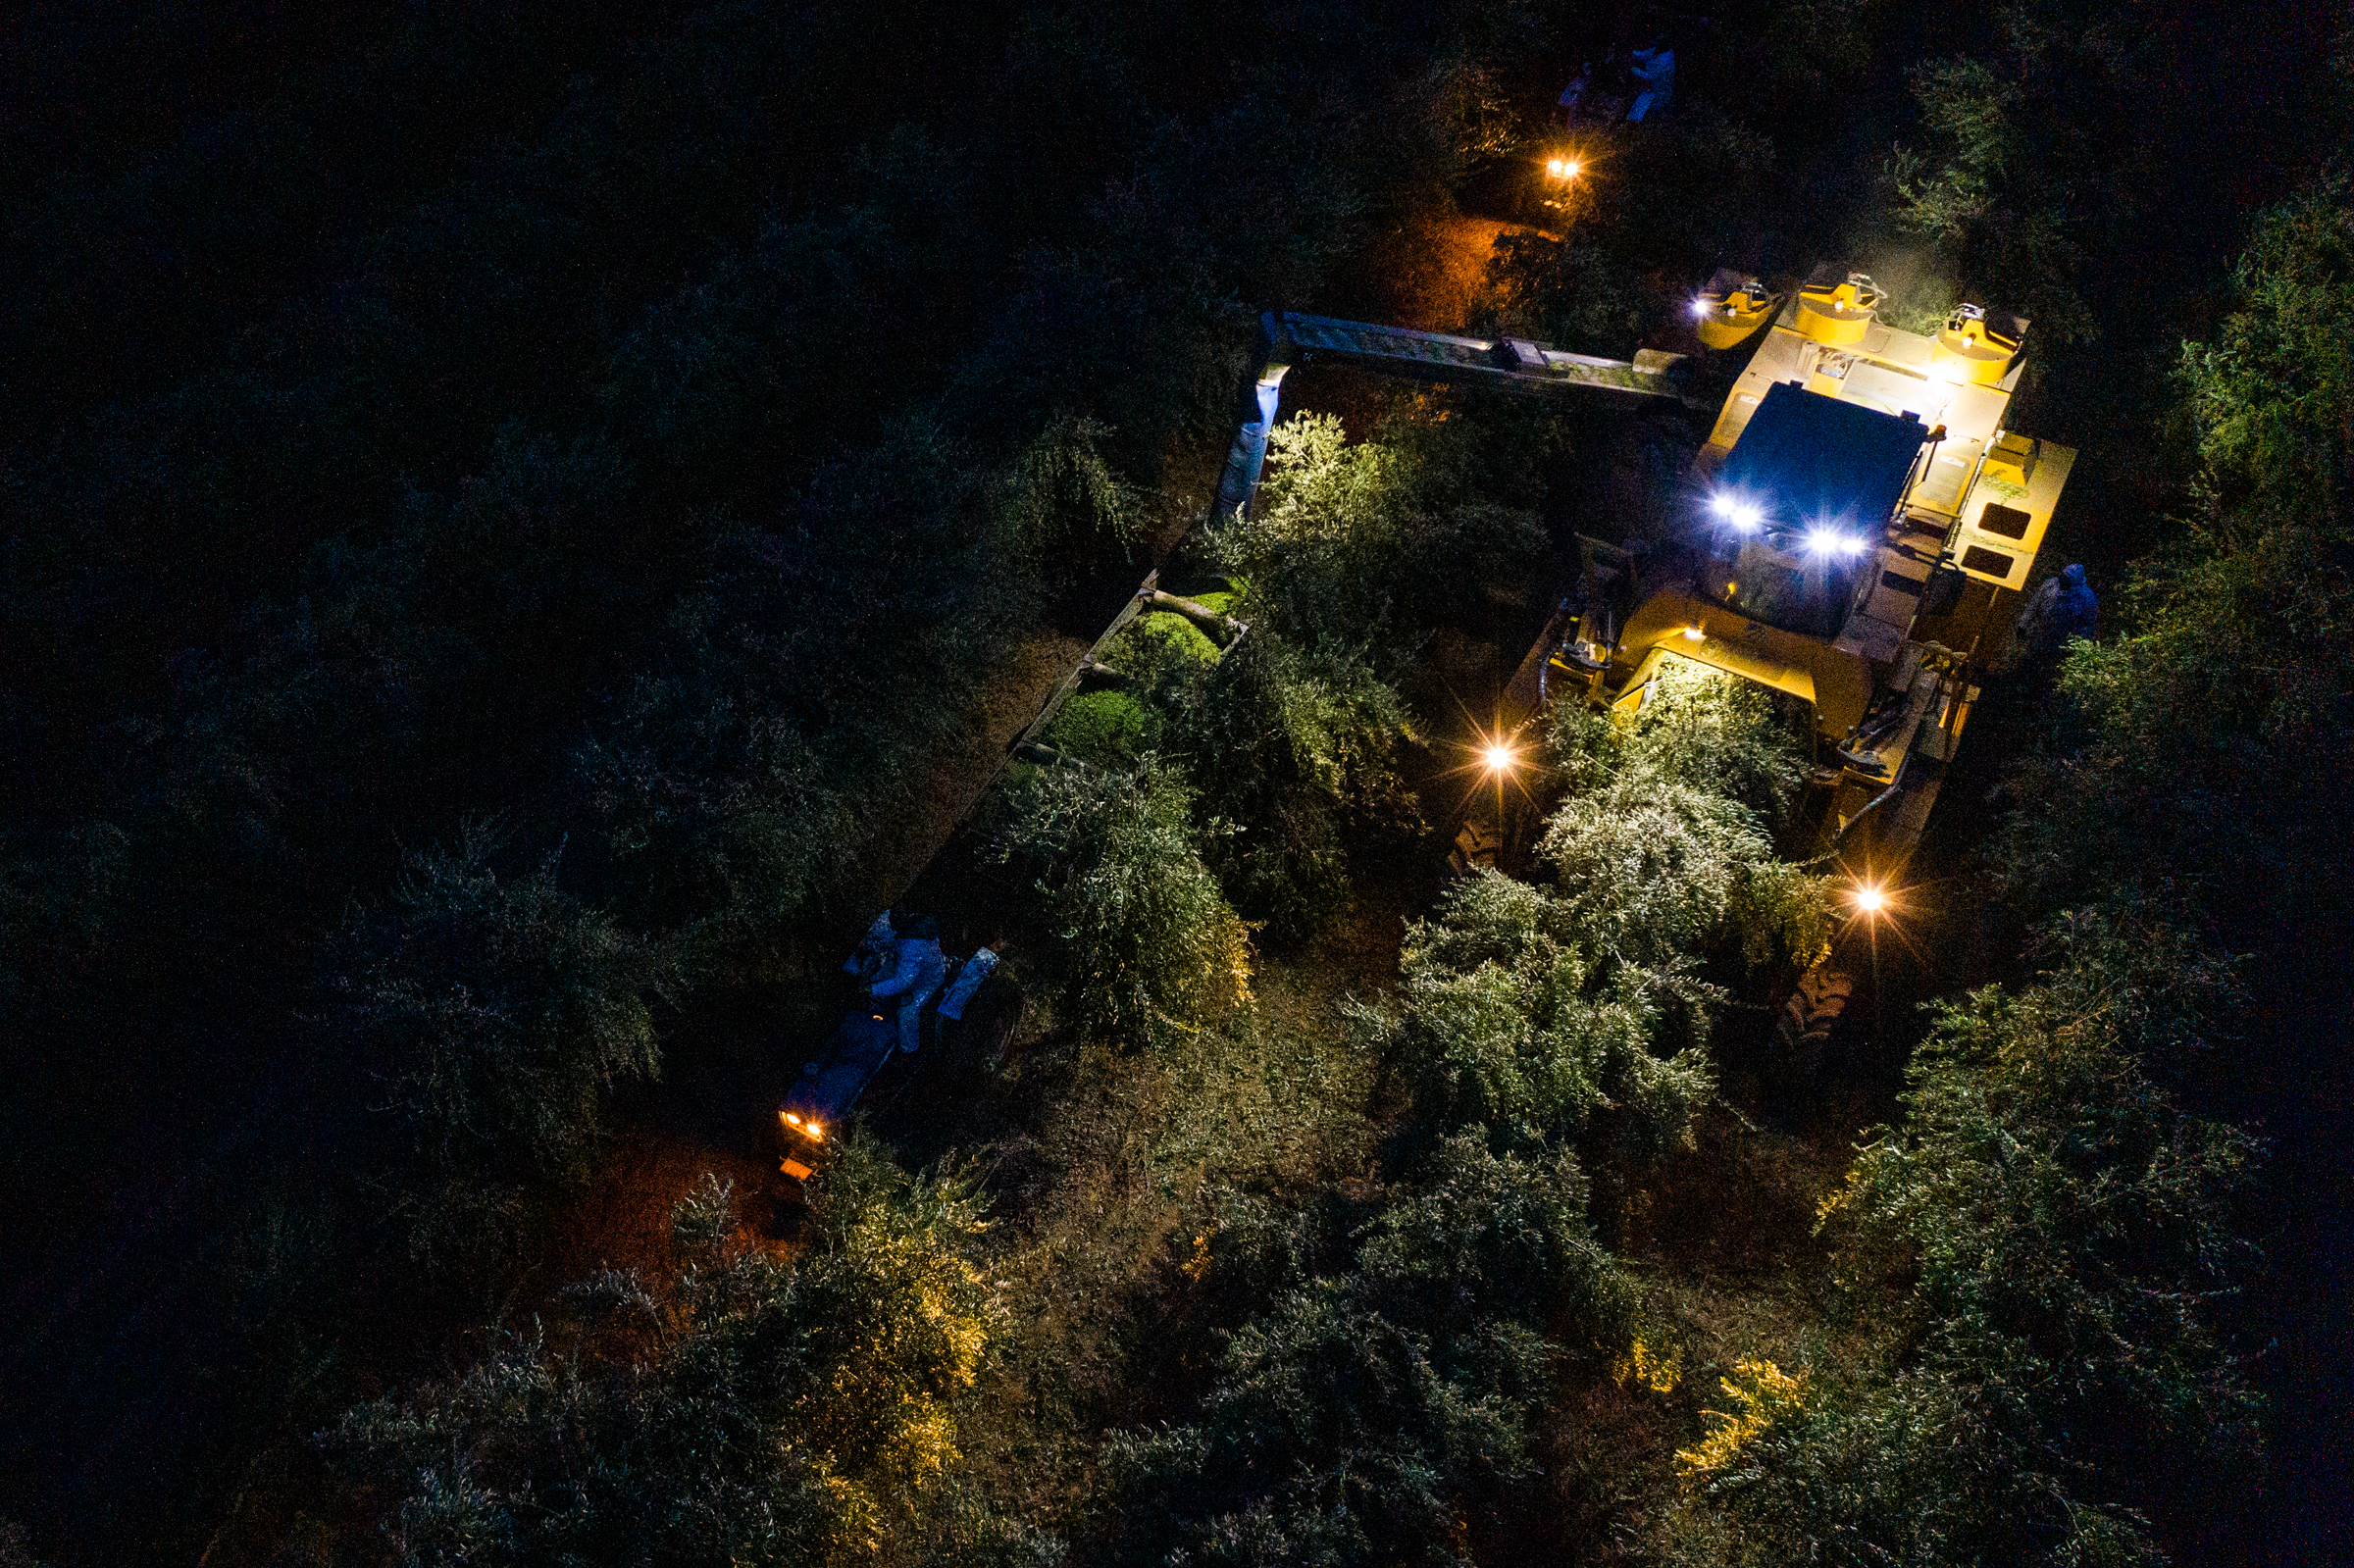 View from above of machinery and crew harvesting at night